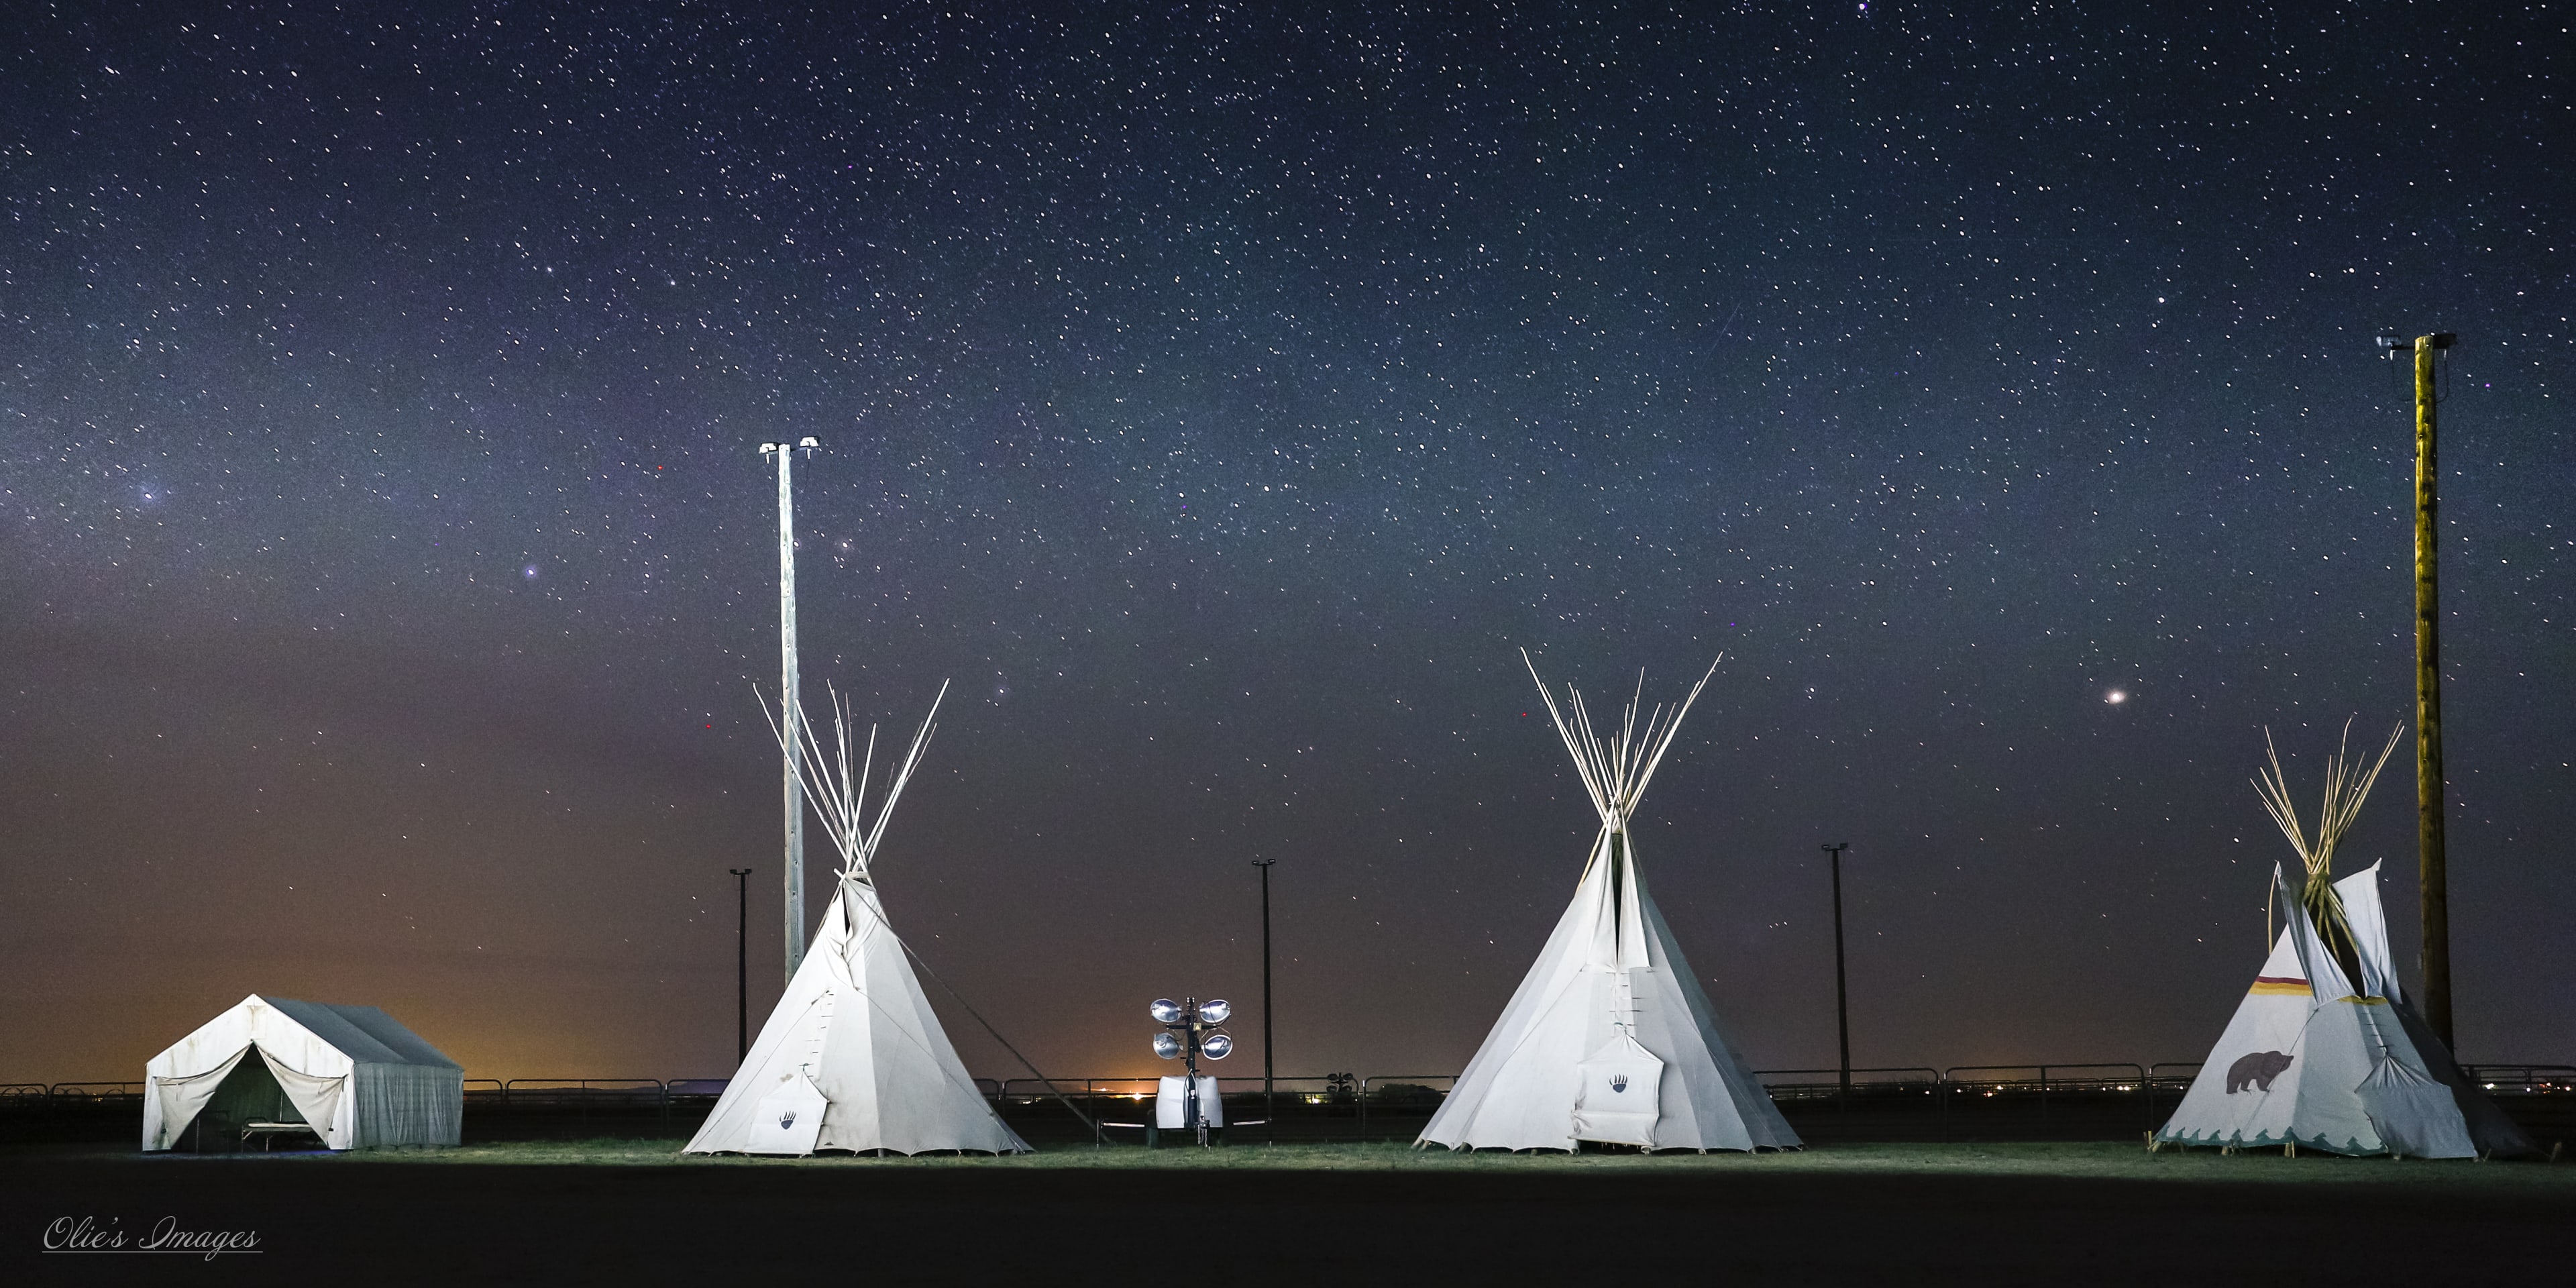 Reserve an authentic Northern Arapahoe tipi to camp in